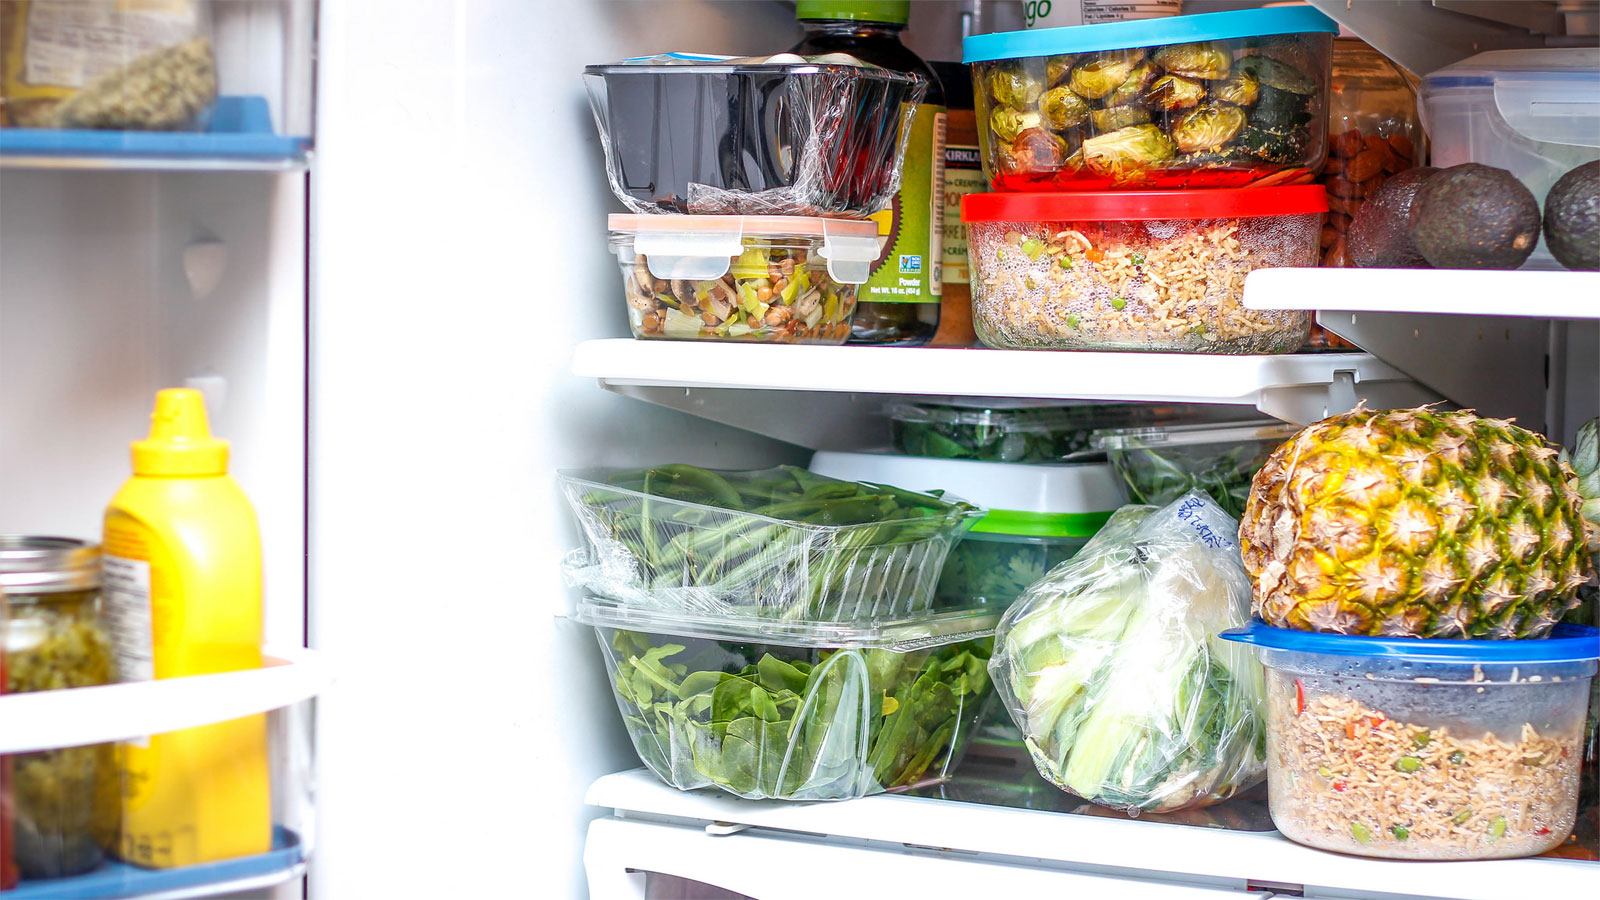 Our top tips for cleaning refrigerators